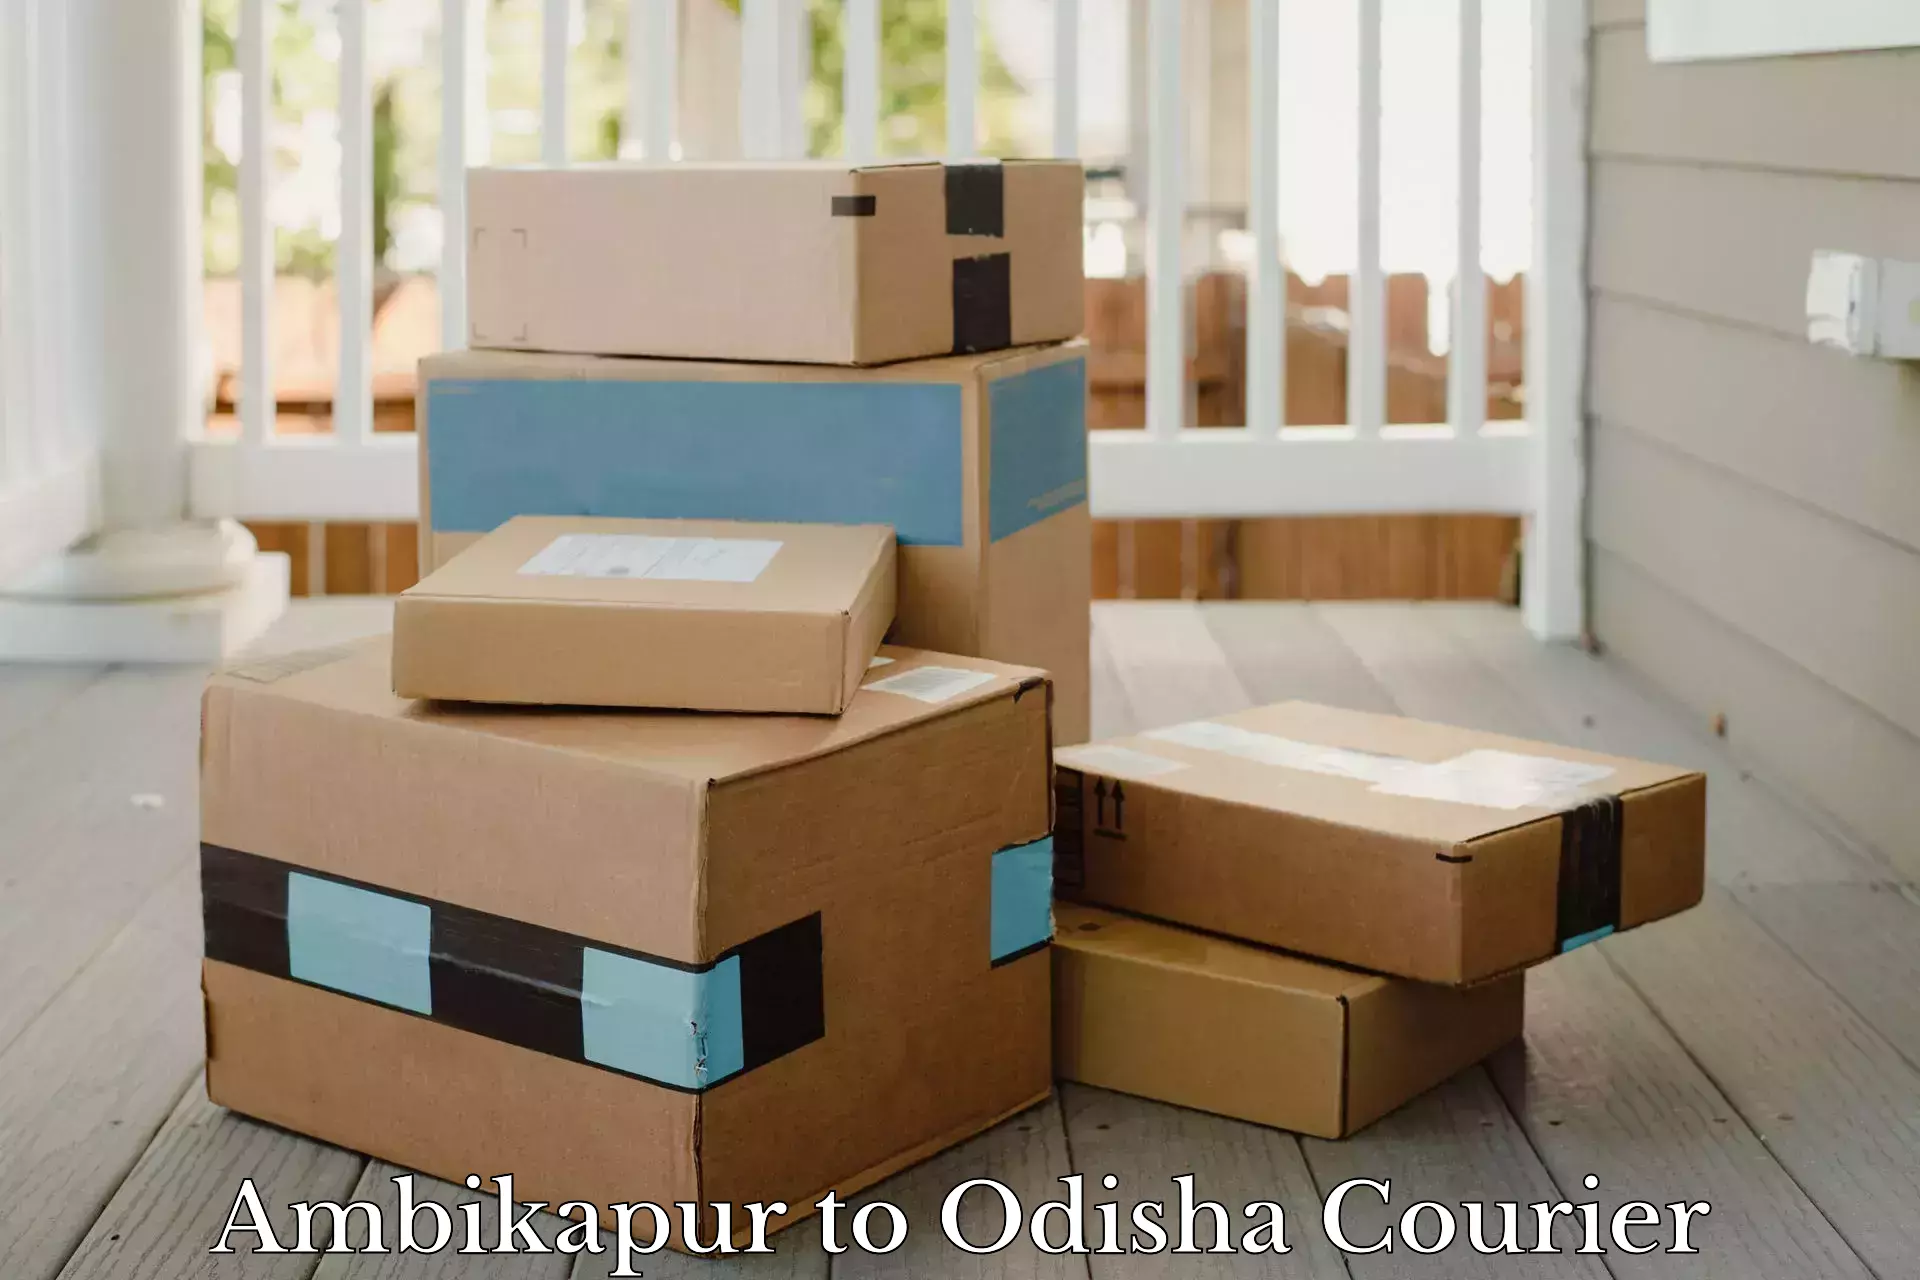 Local delivery service Ambikapur to Gopalapur Ganjam